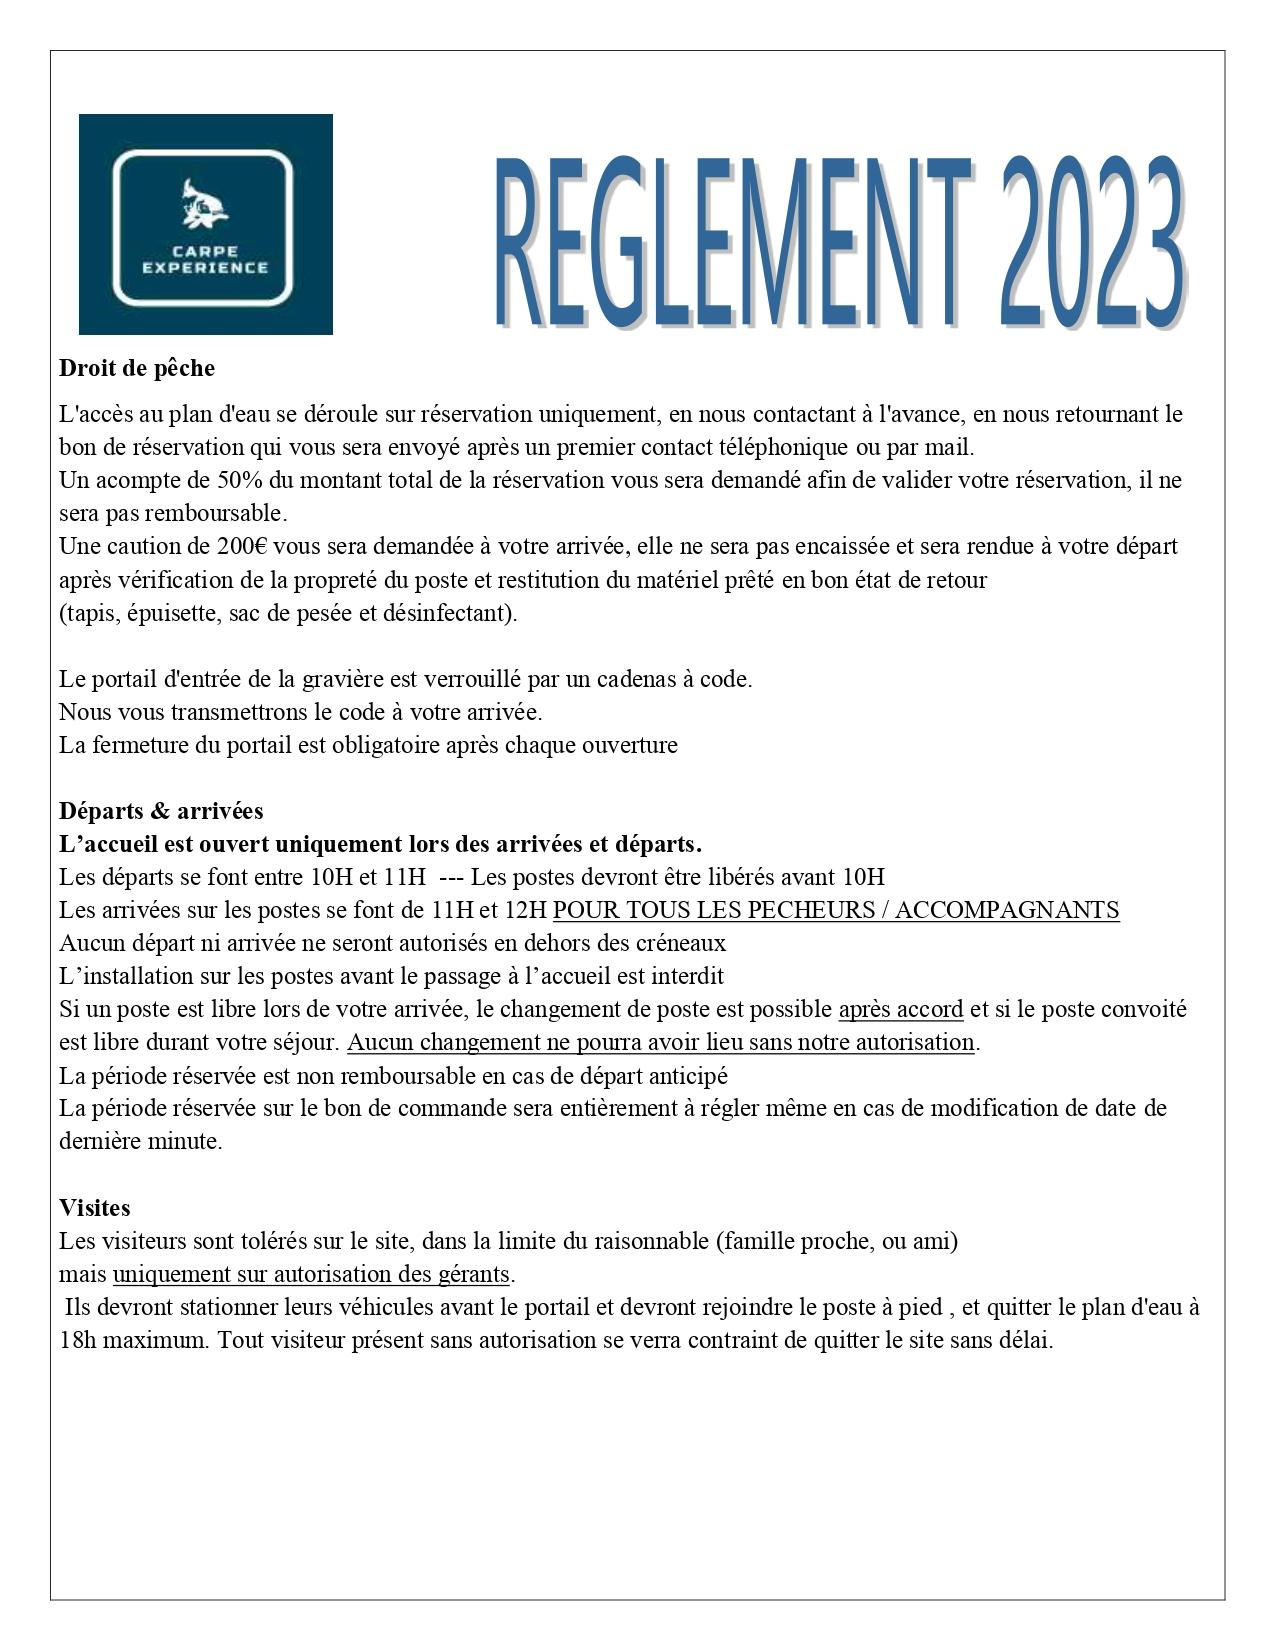 Reglement 2023 pages to jpg 2